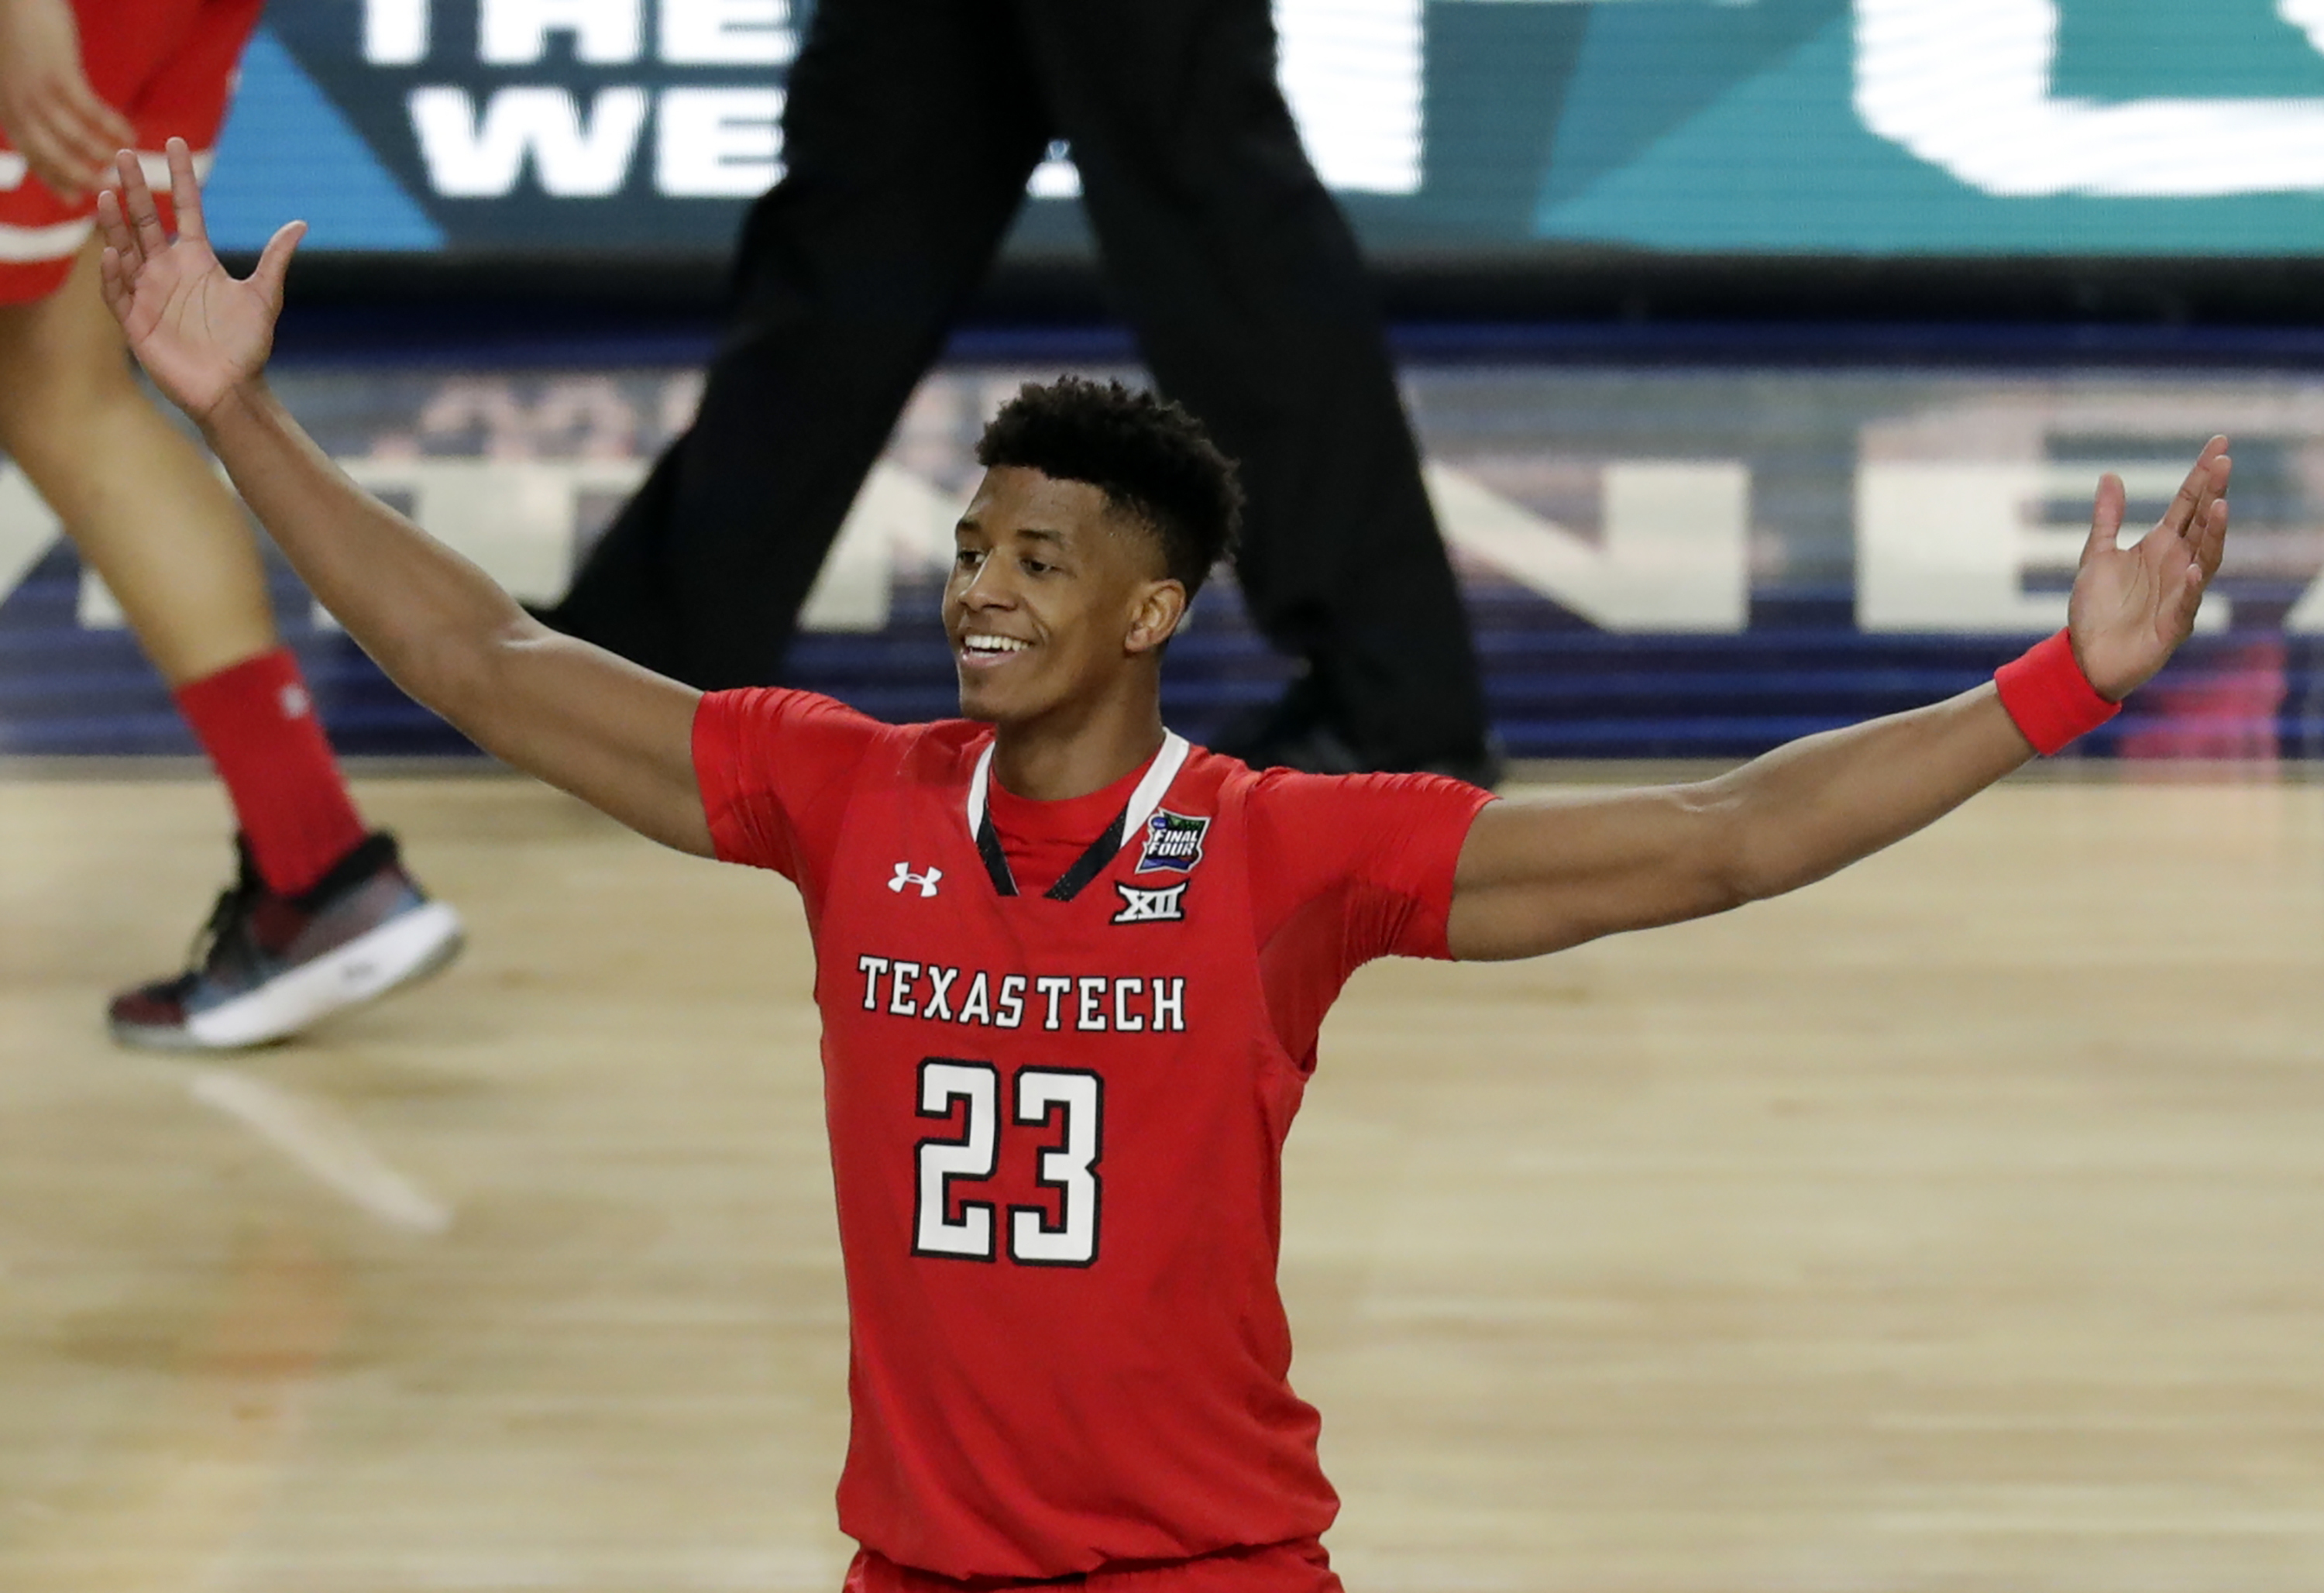 Virginia, Texas Tech get defensive to move to title game